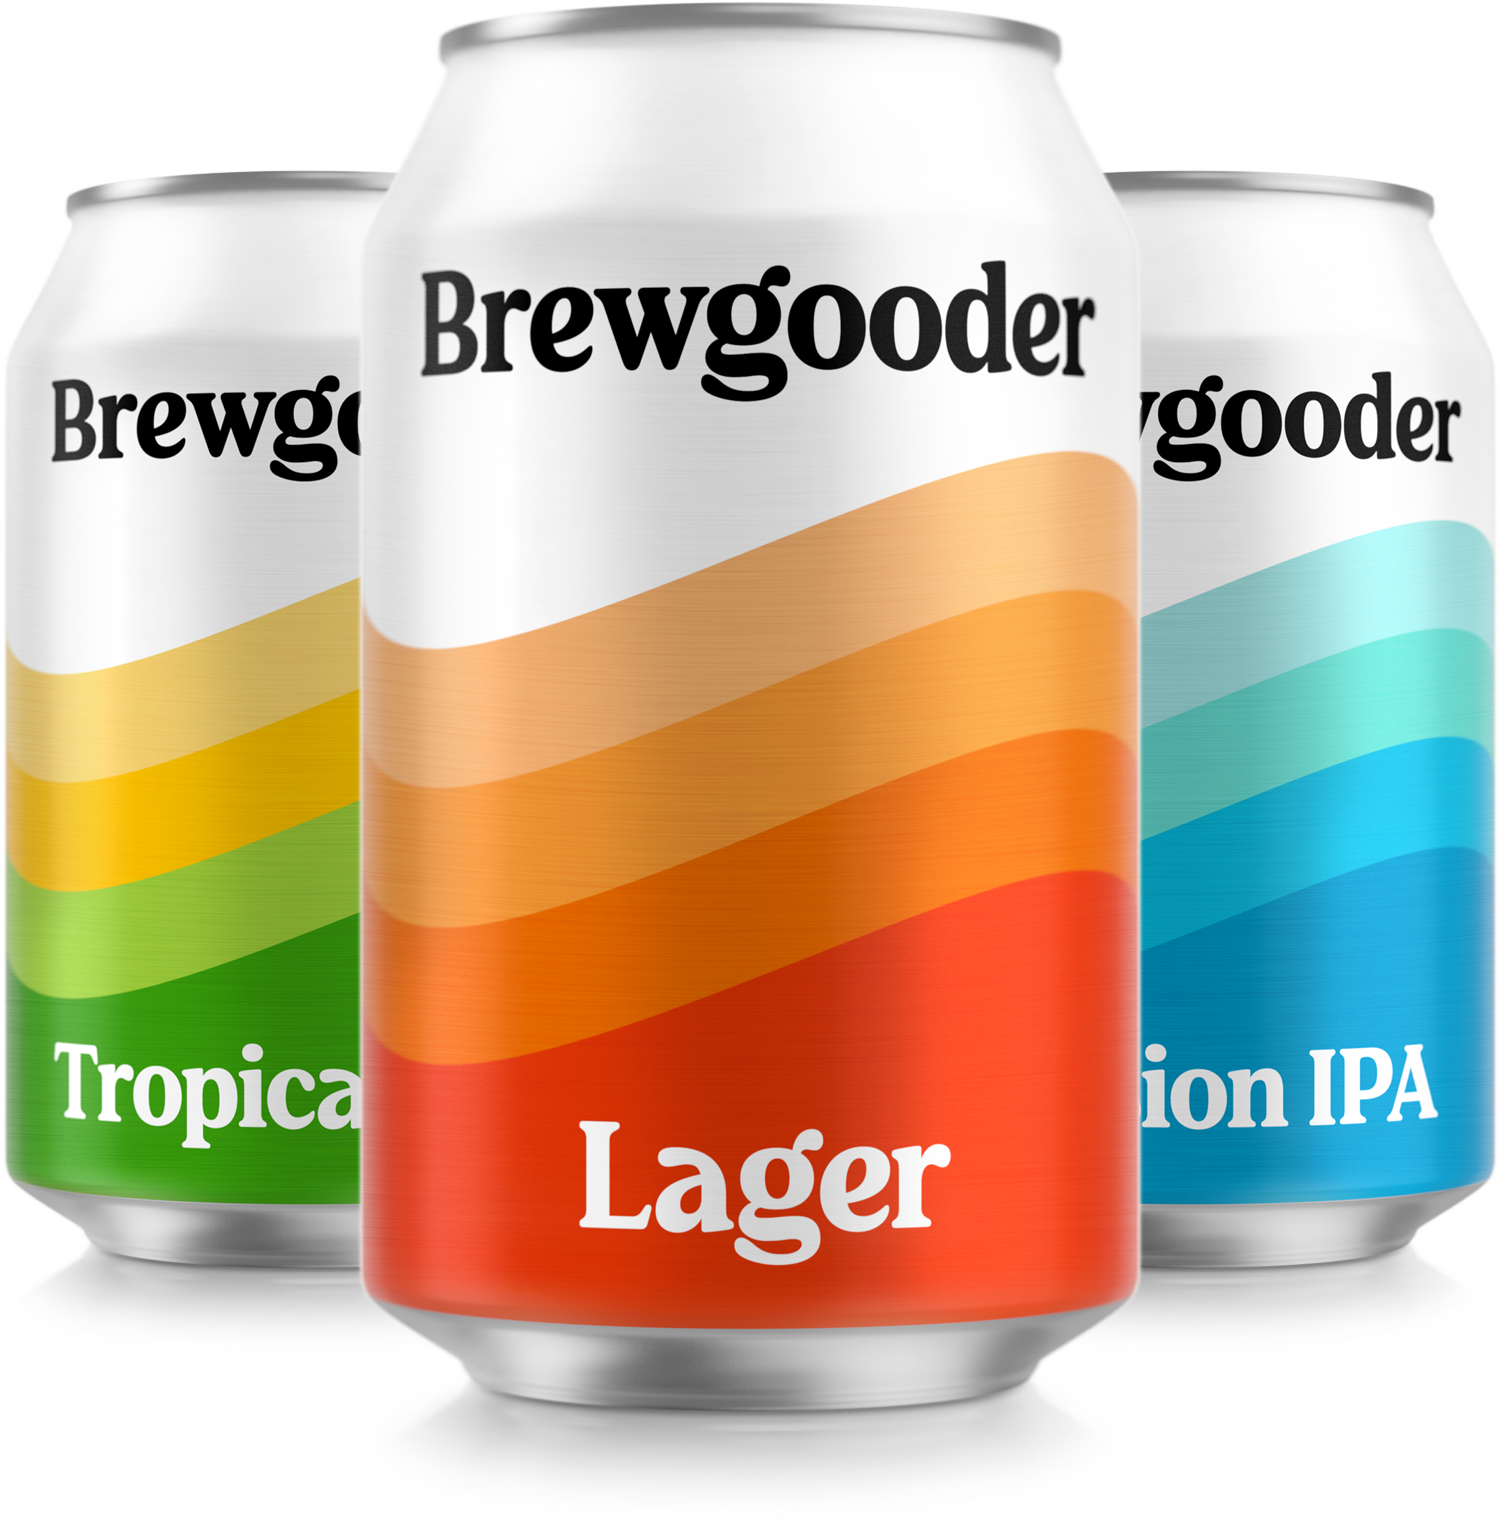 The Brewgooder Mixed Pack